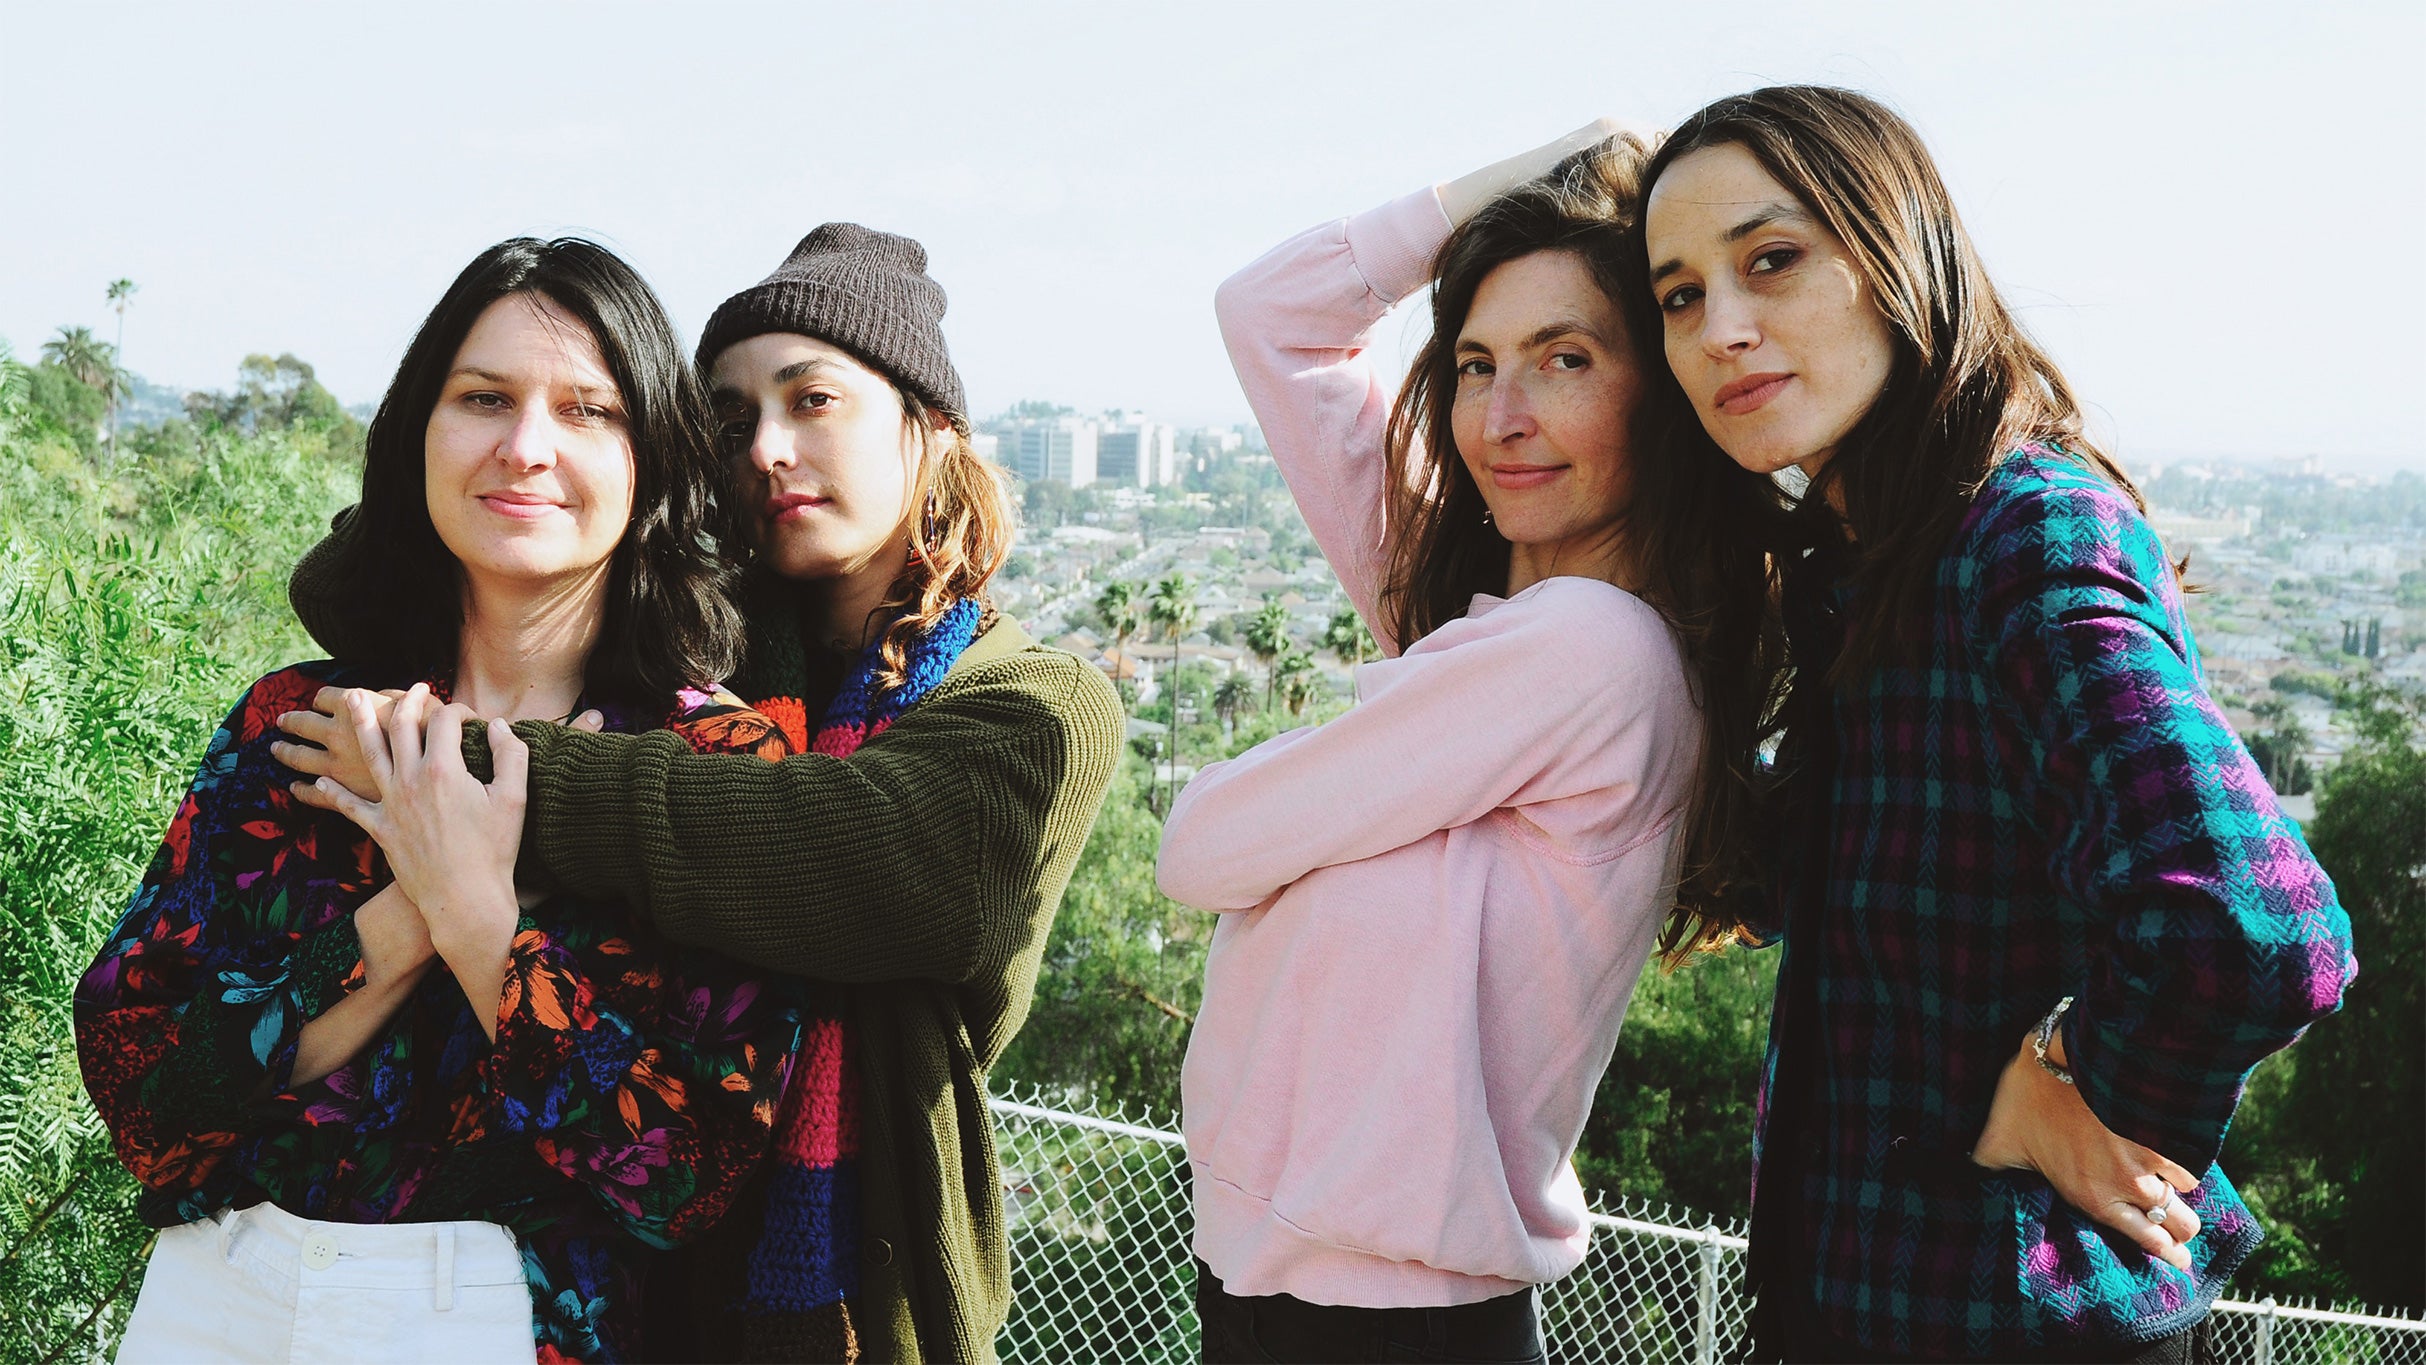 Warpaint (18+) free presale listing for show tickets in Boston, MA (Paradise Rock Club presented by Citizens)